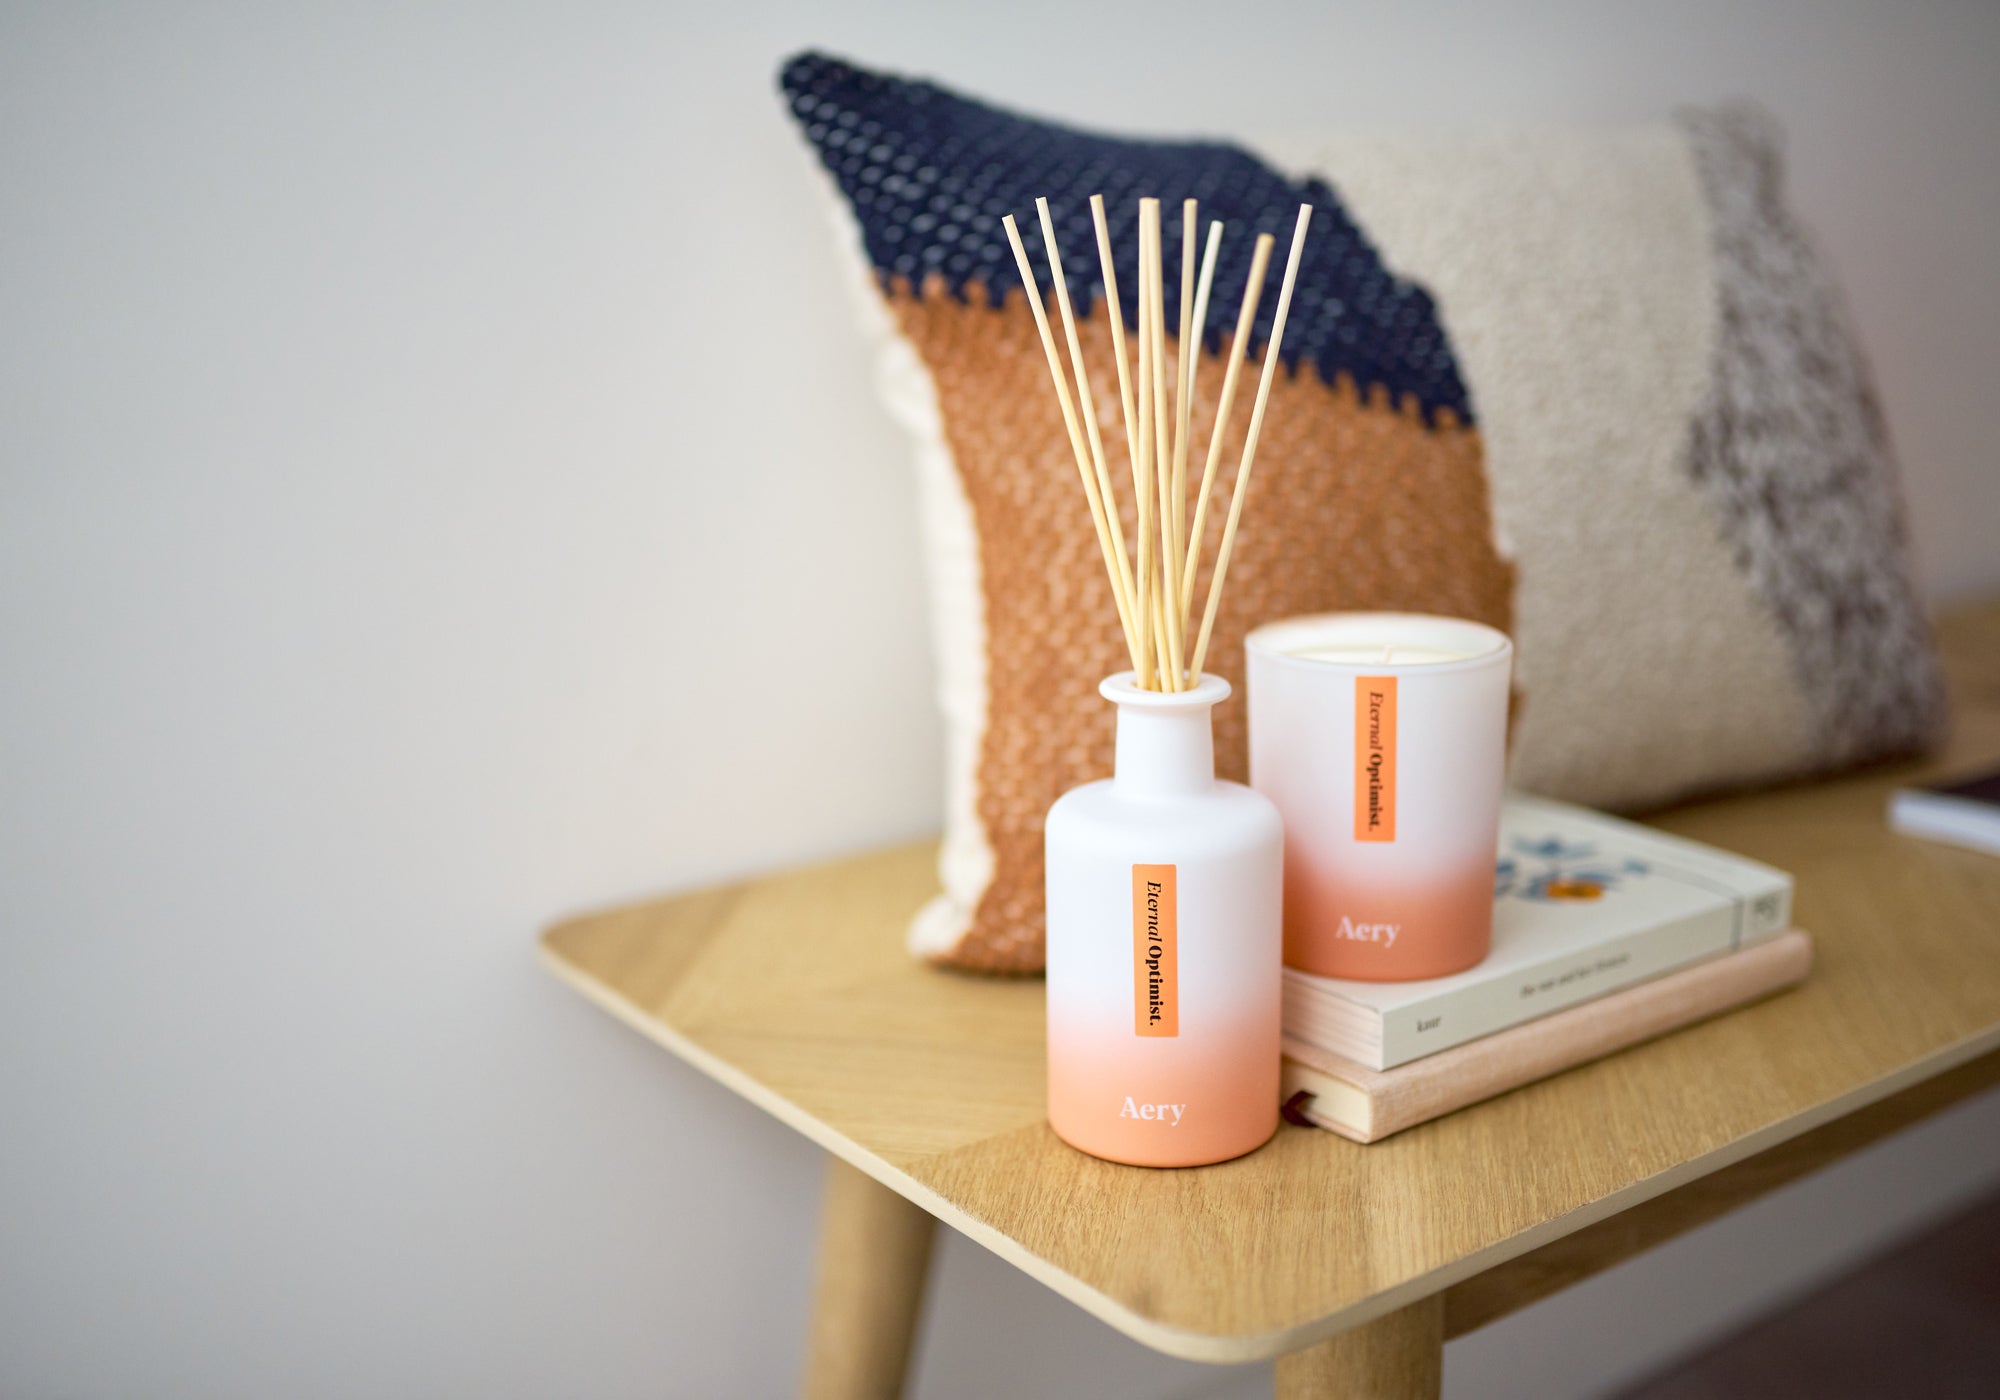 orange aery reed diffuser and matching candle displayed decoratively with cushion and books